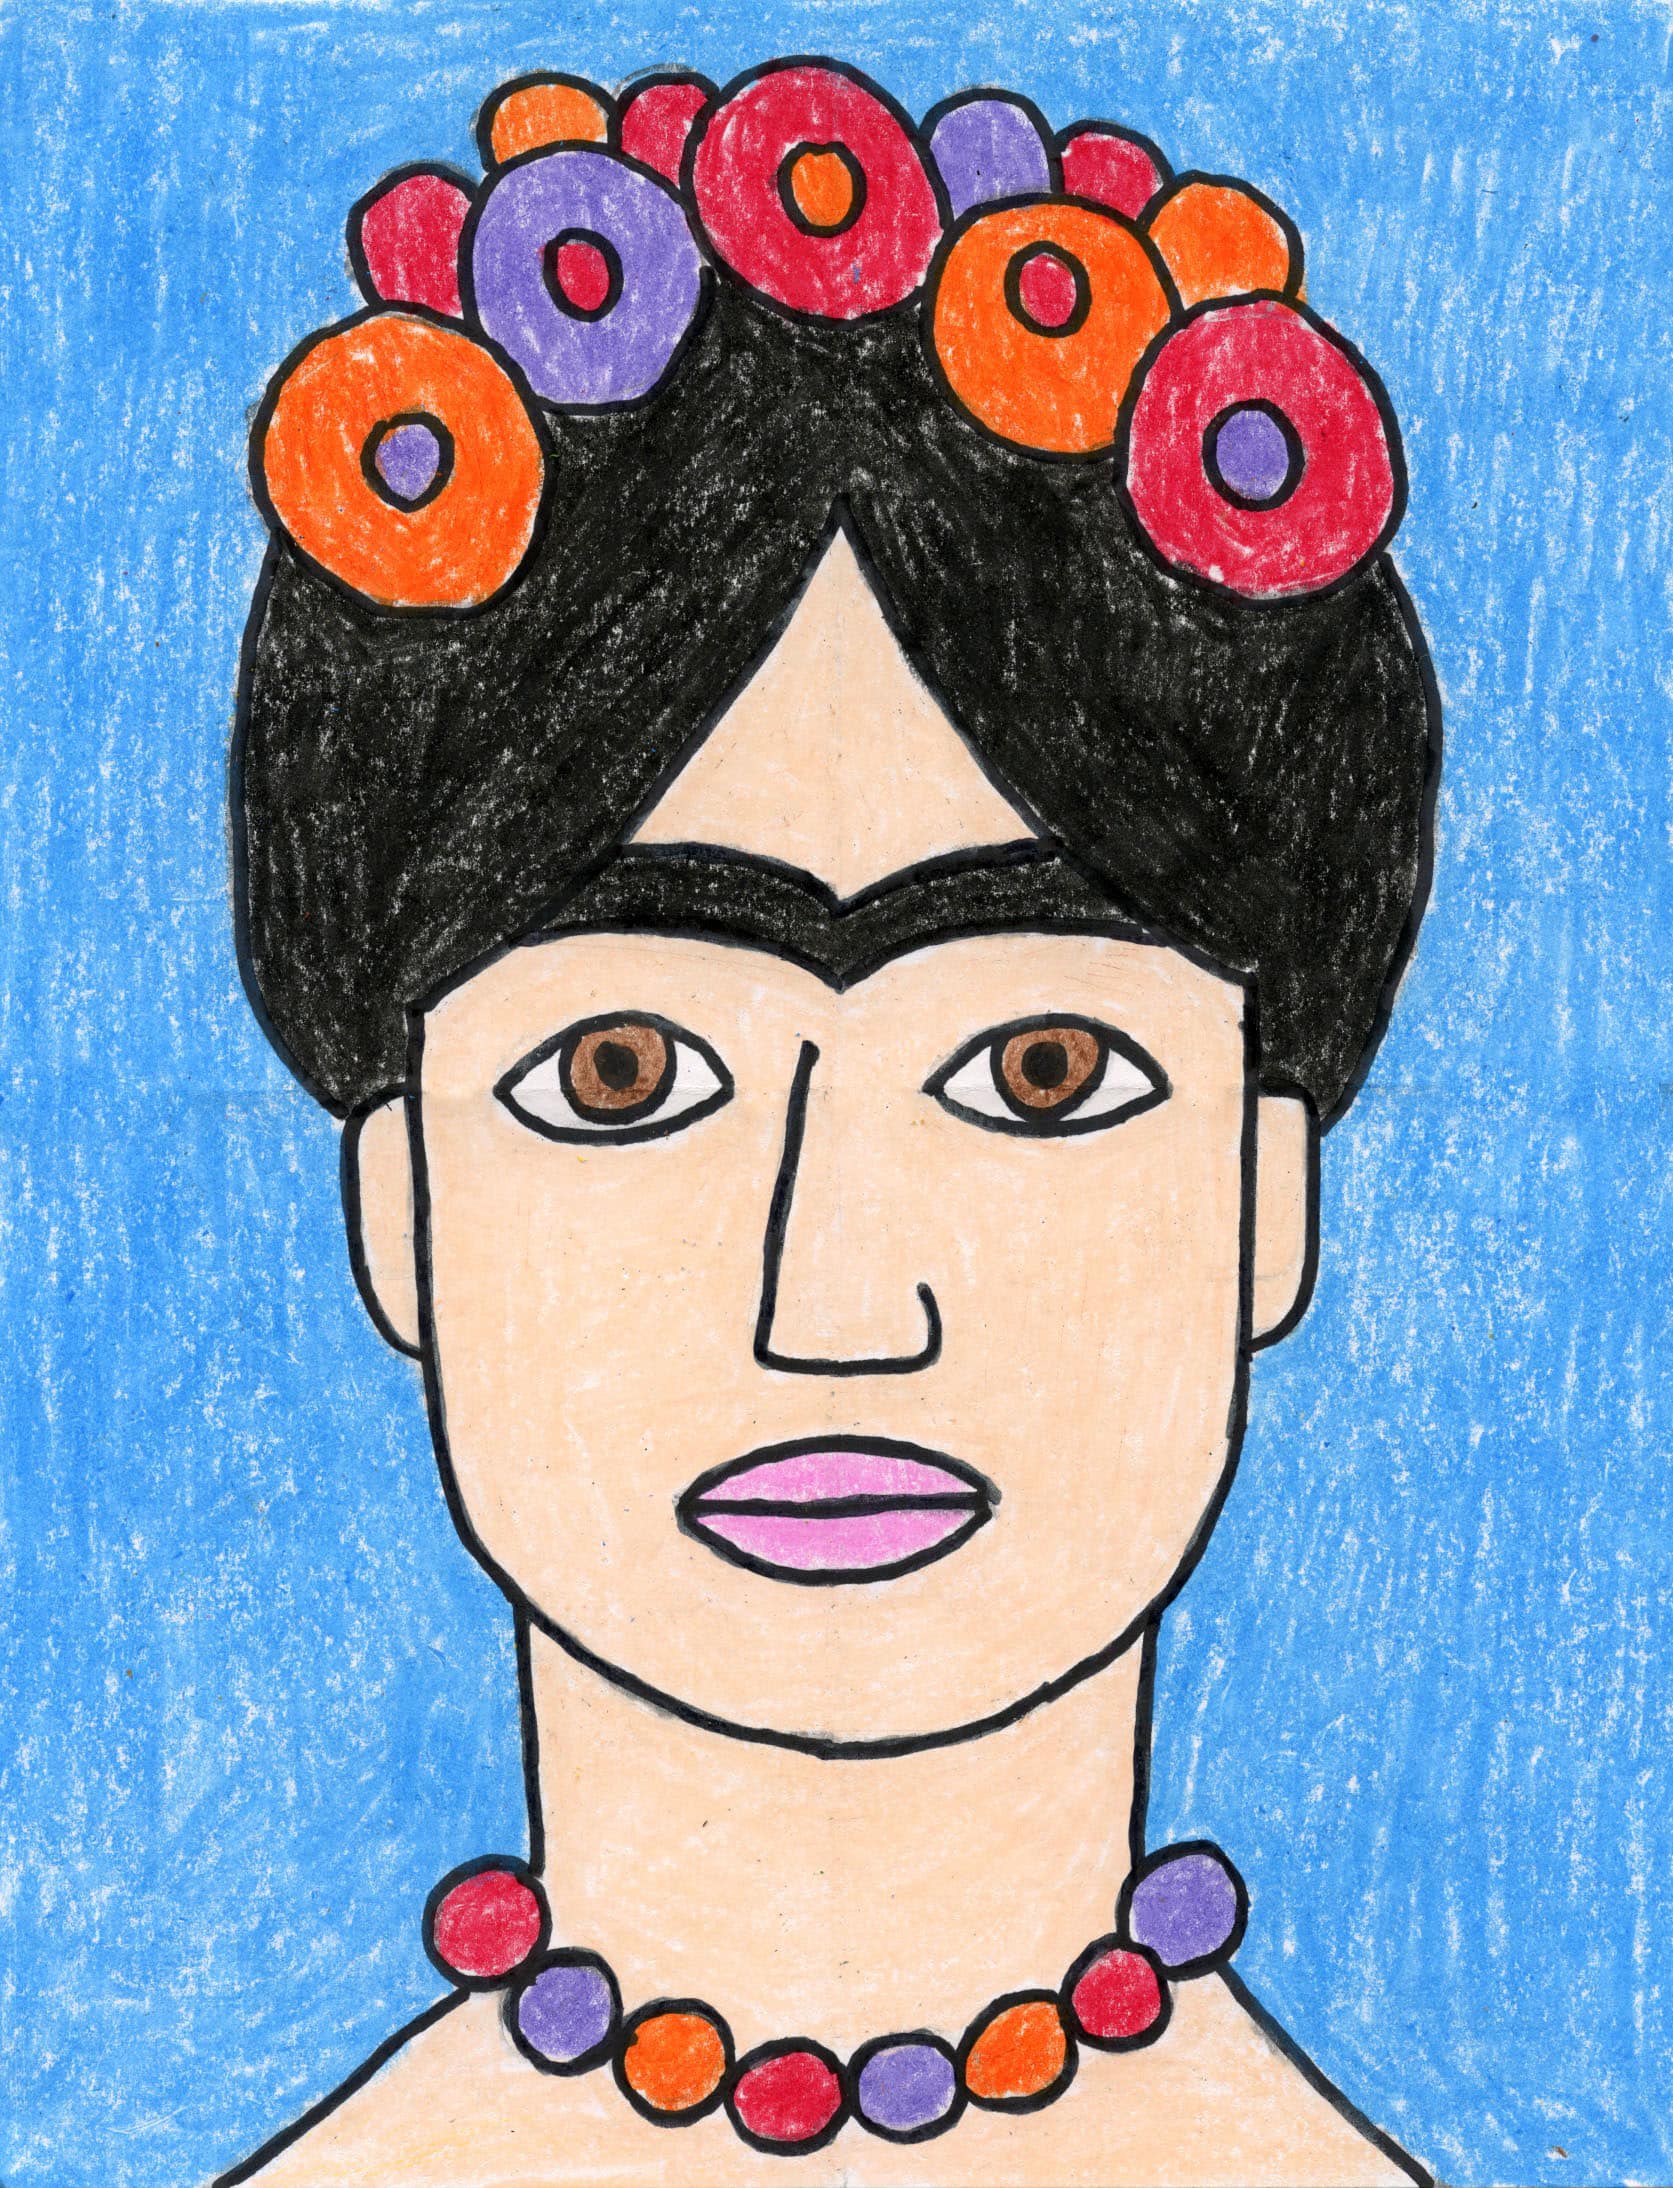 Easy How to Draw Frida Kahlo Tutorial Video and Frida Kahlo Coloring Page